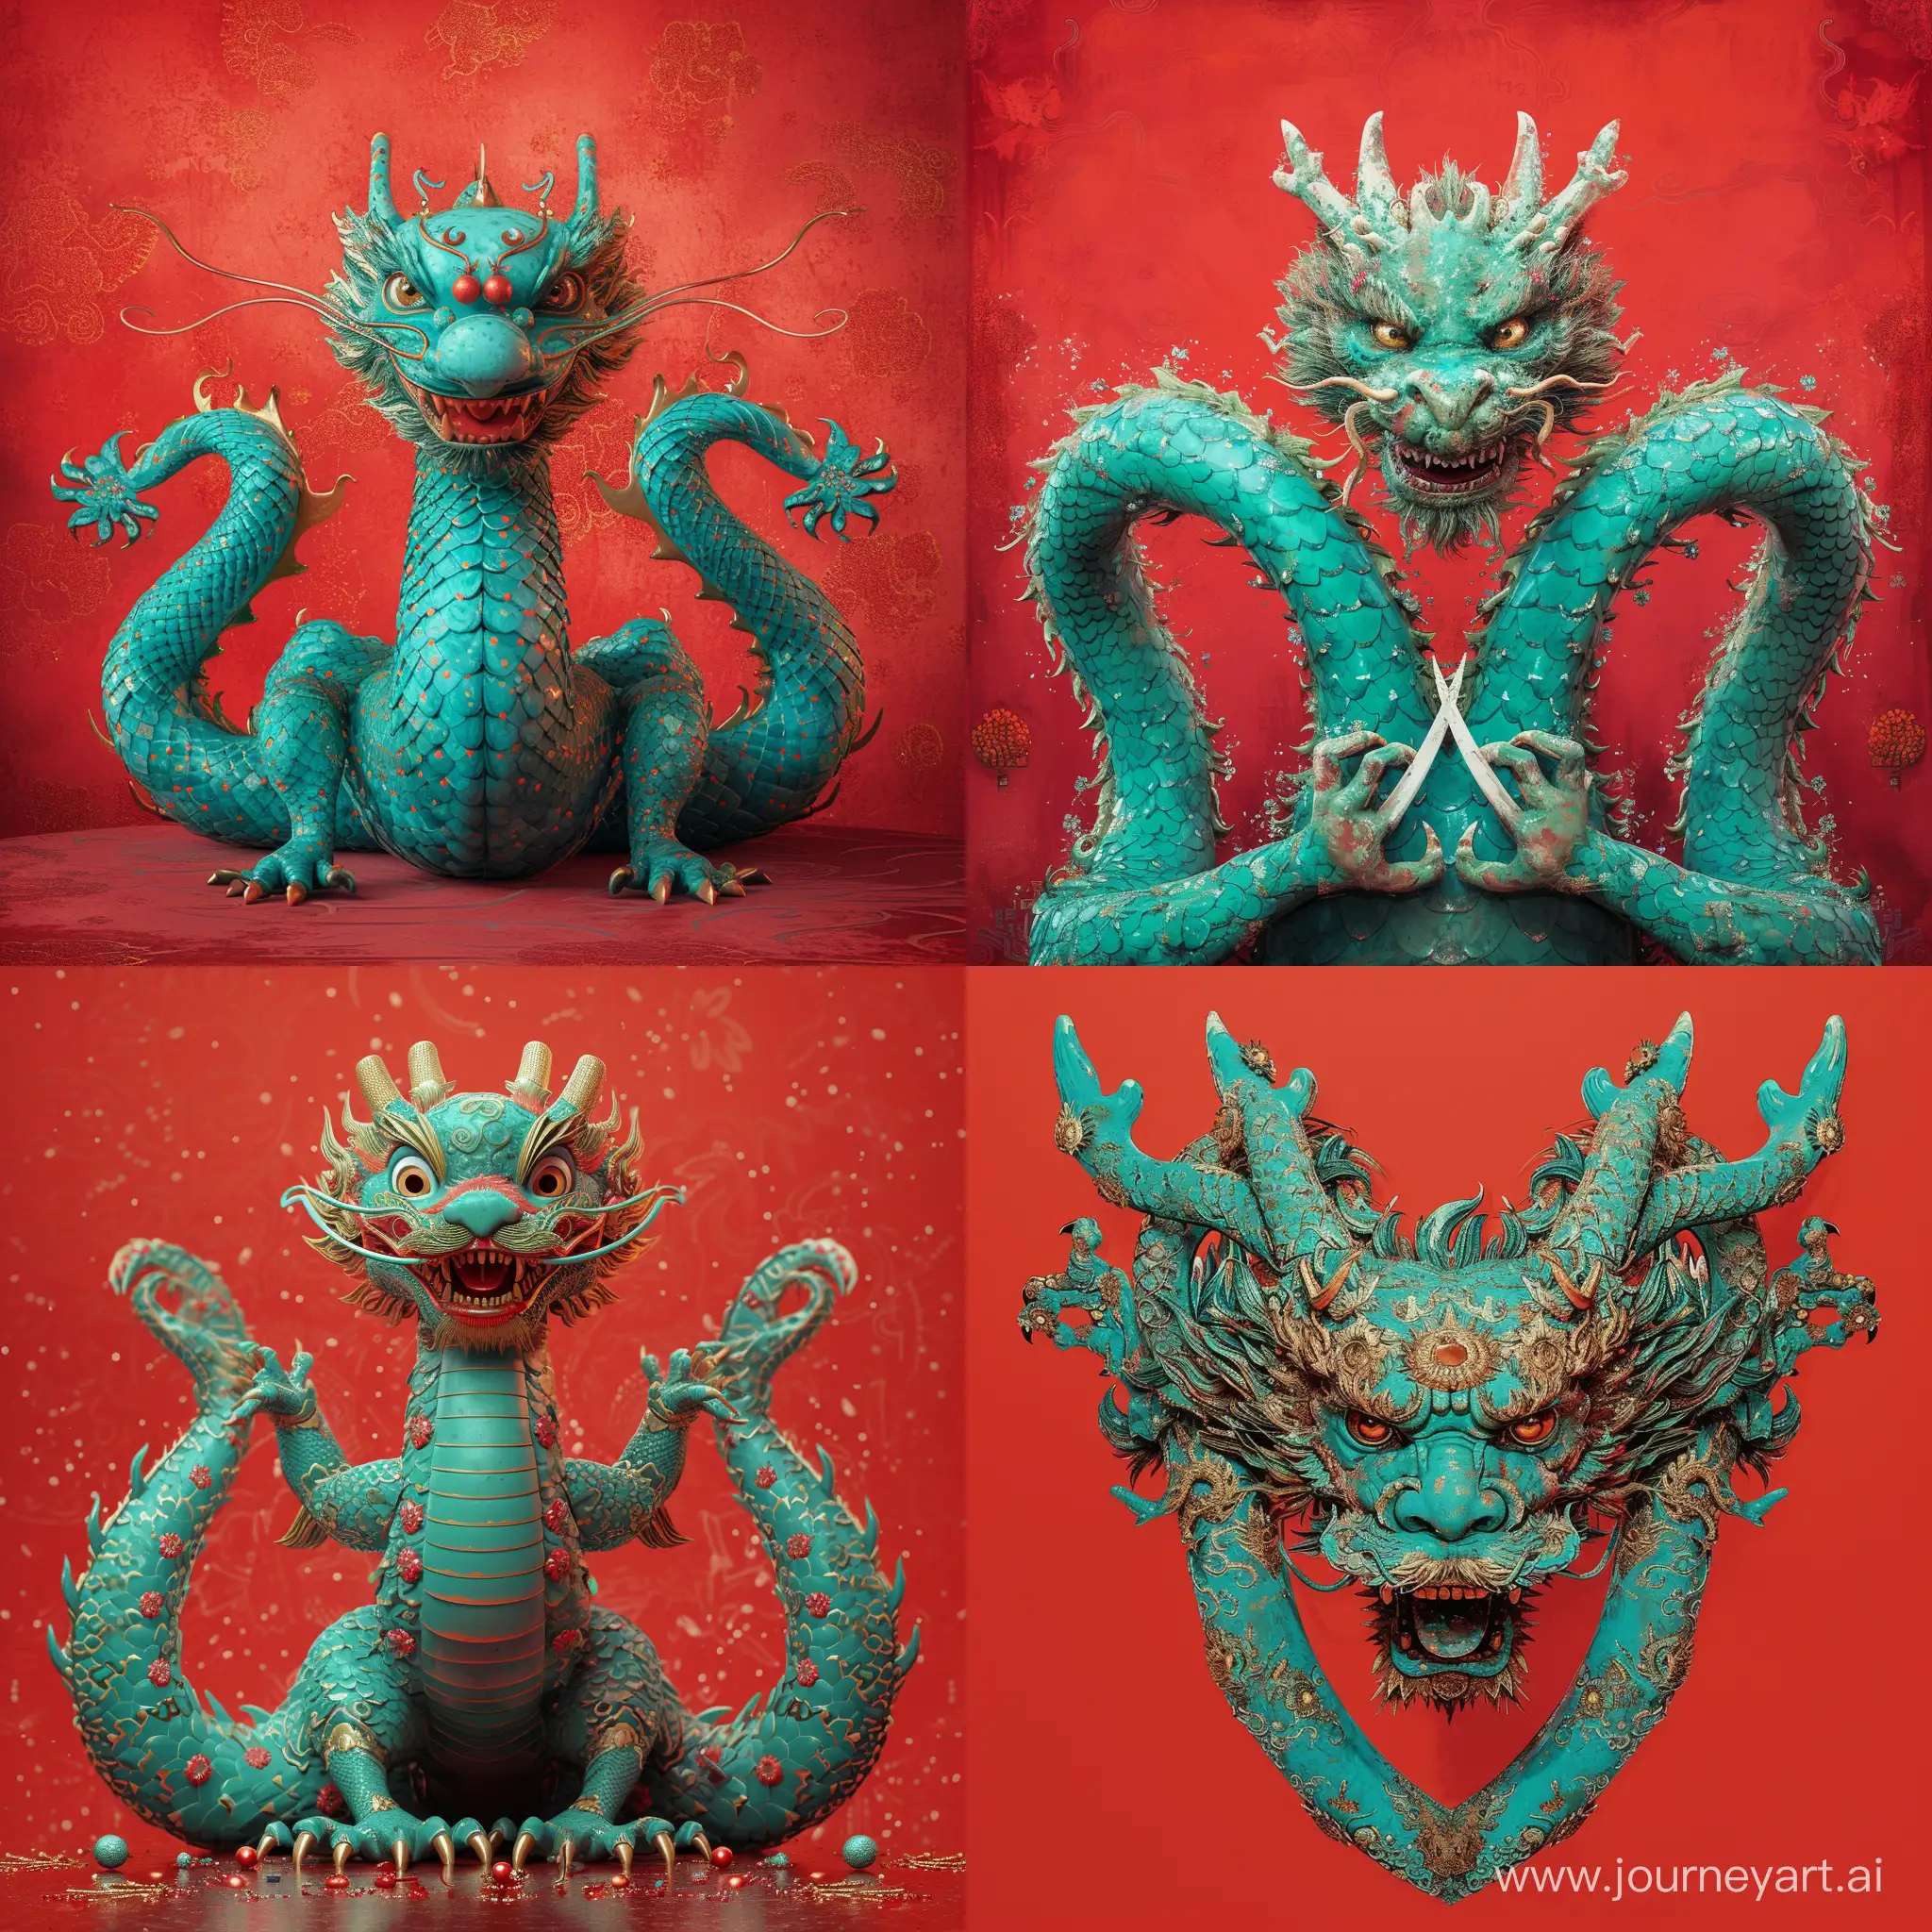 Joyful-Turquoise-Chinese-Dragon-with-Traditional-Festive-Decor-on-Red-Background